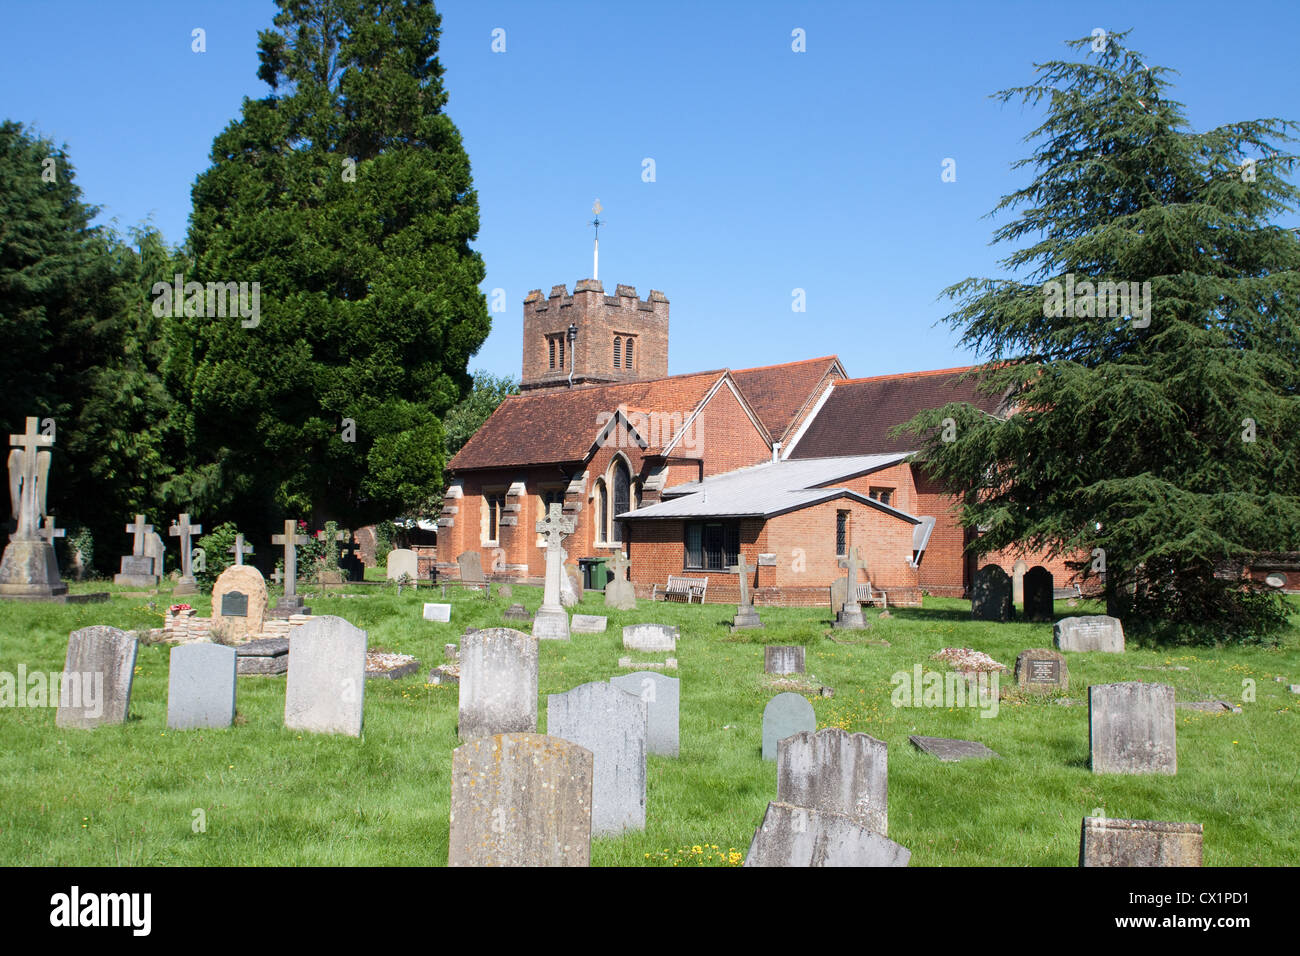 The graveyard of the parish church of St James, Fulmer. Stock Photo